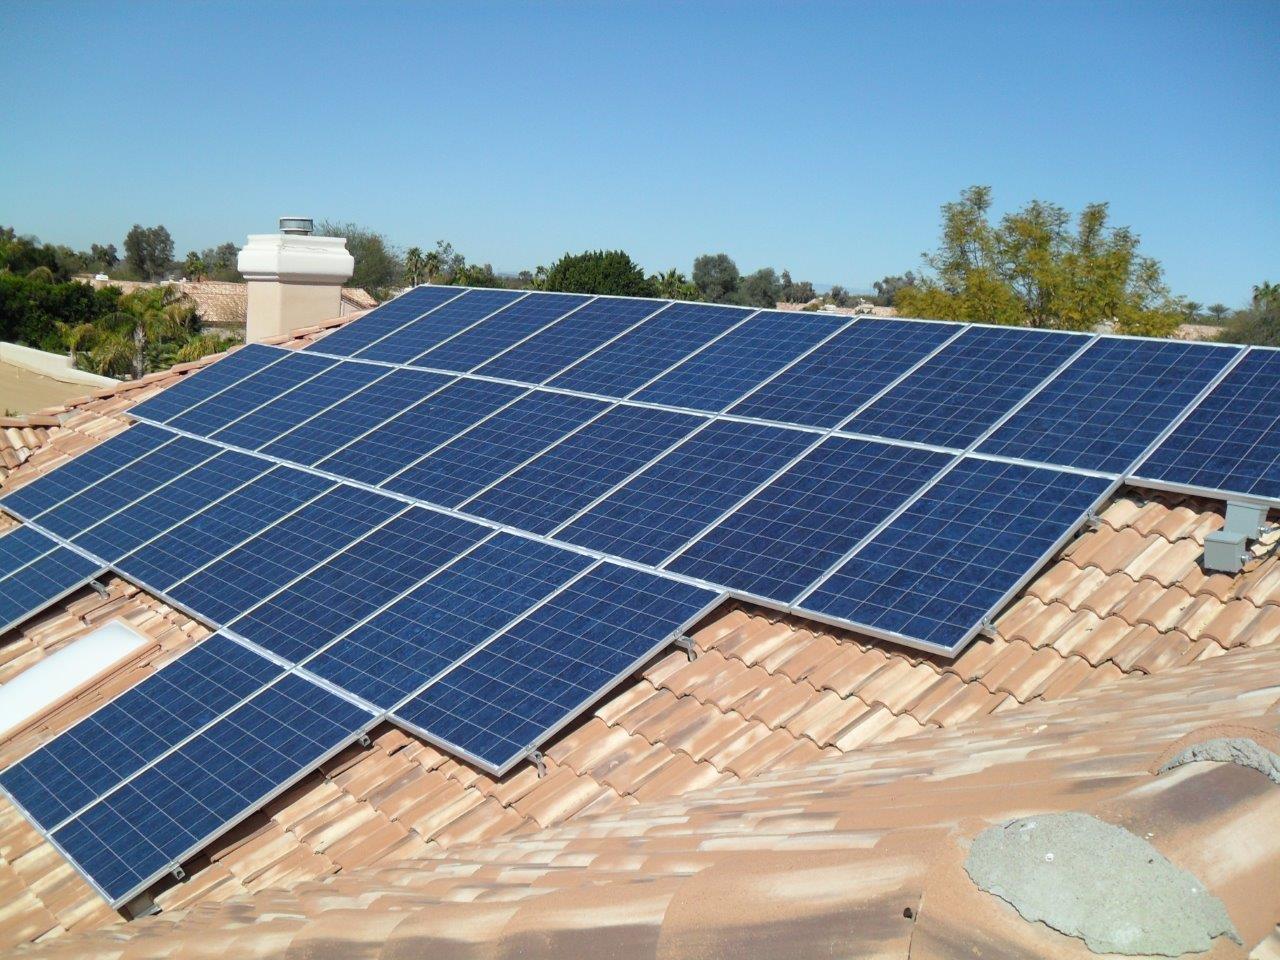 Phoenix solar homes – does solar add value to my home?